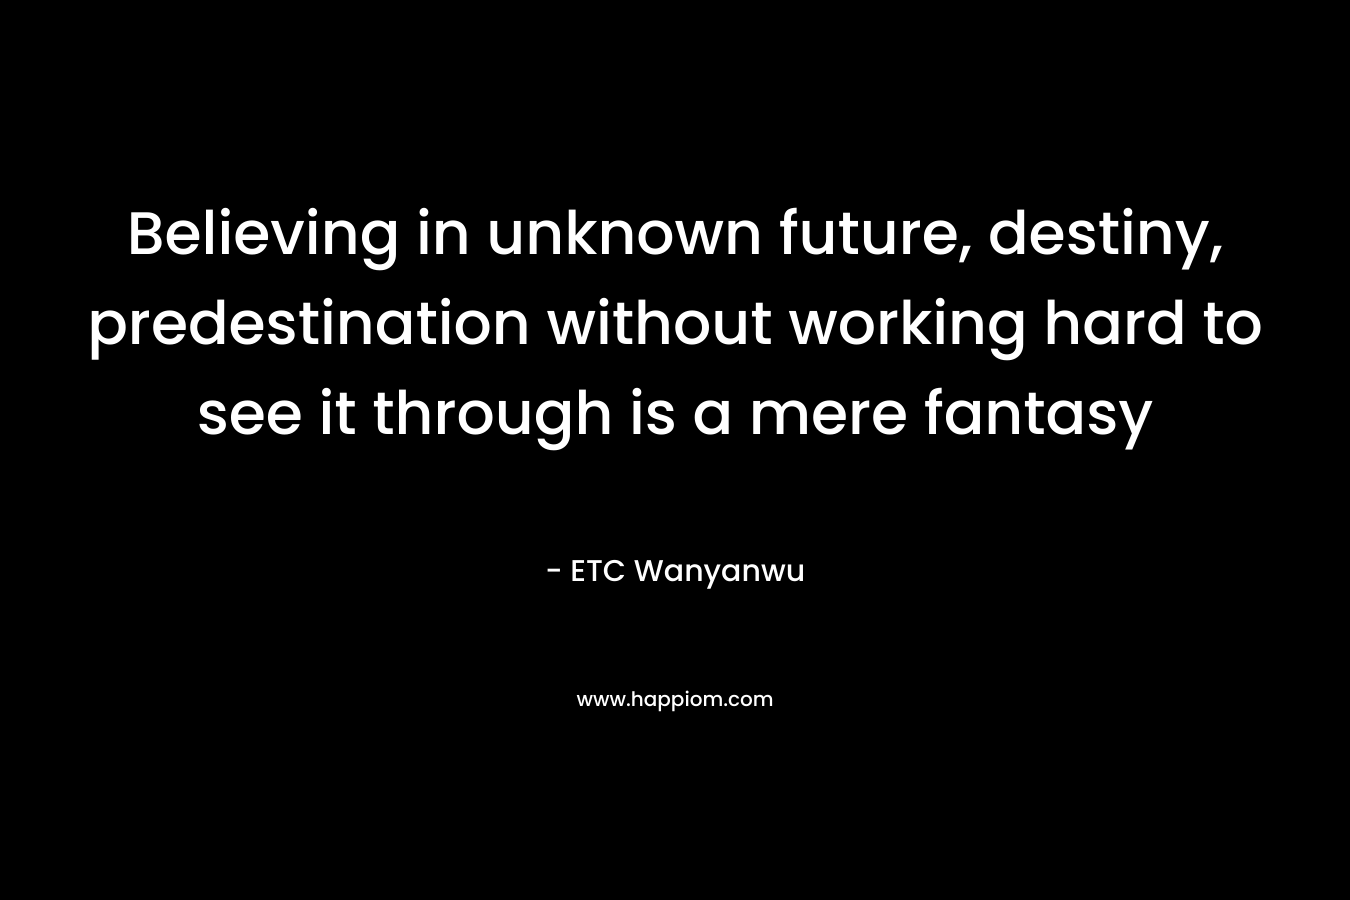 Believing in unknown future, destiny, predestination without working hard to see it through is a mere fantasy – ETC Wanyanwu